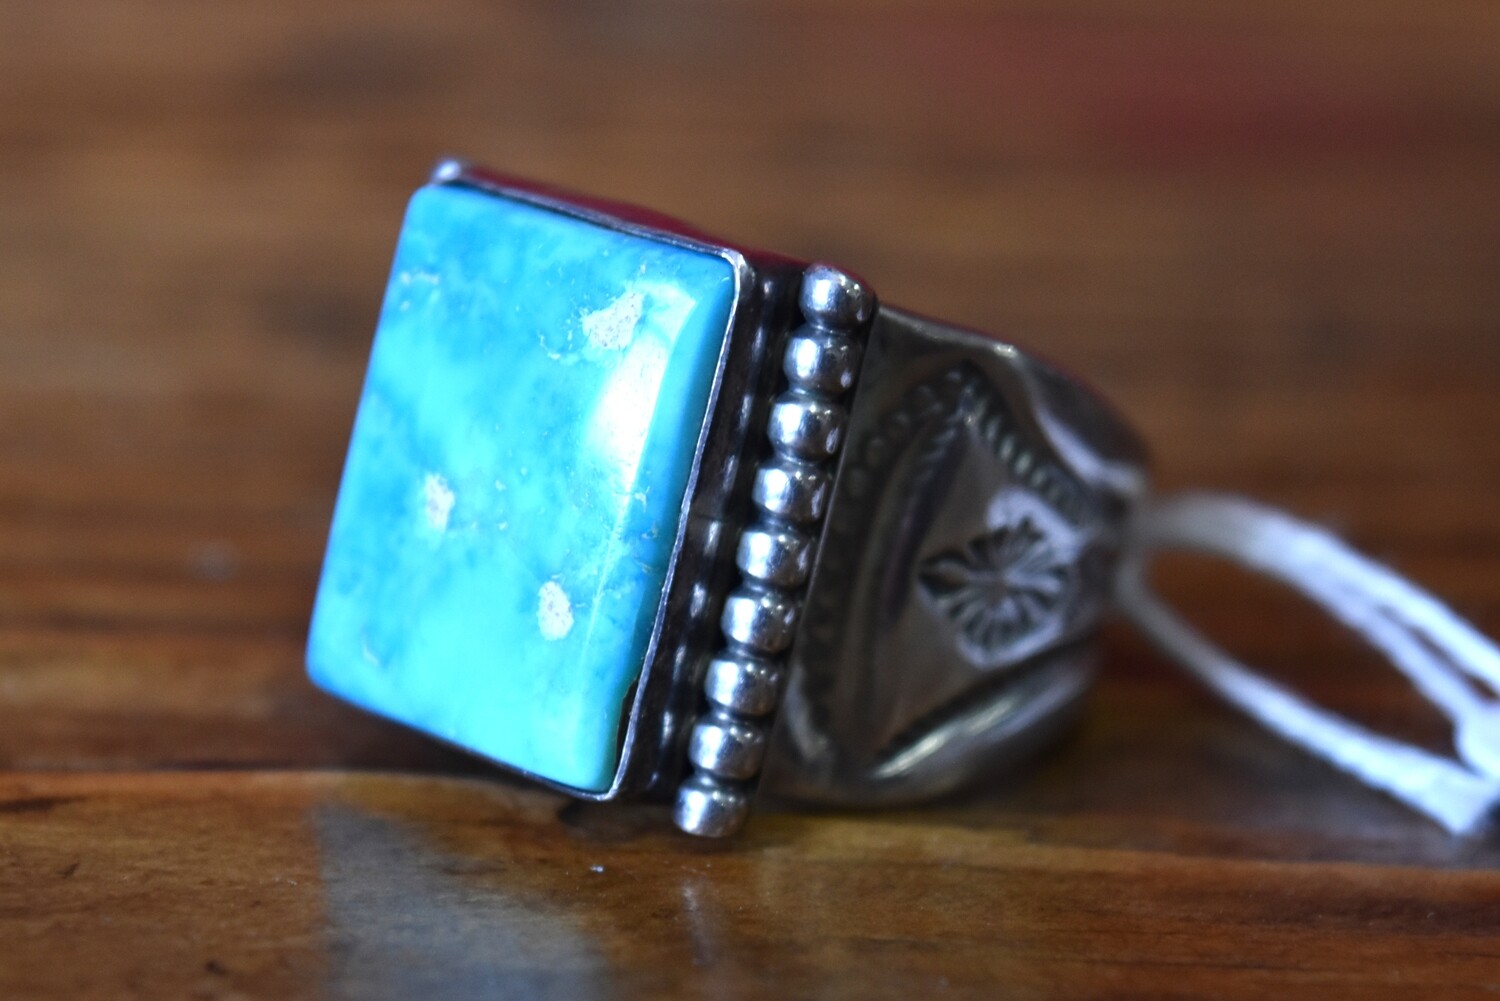 Silver Turquoise Navajo Ring